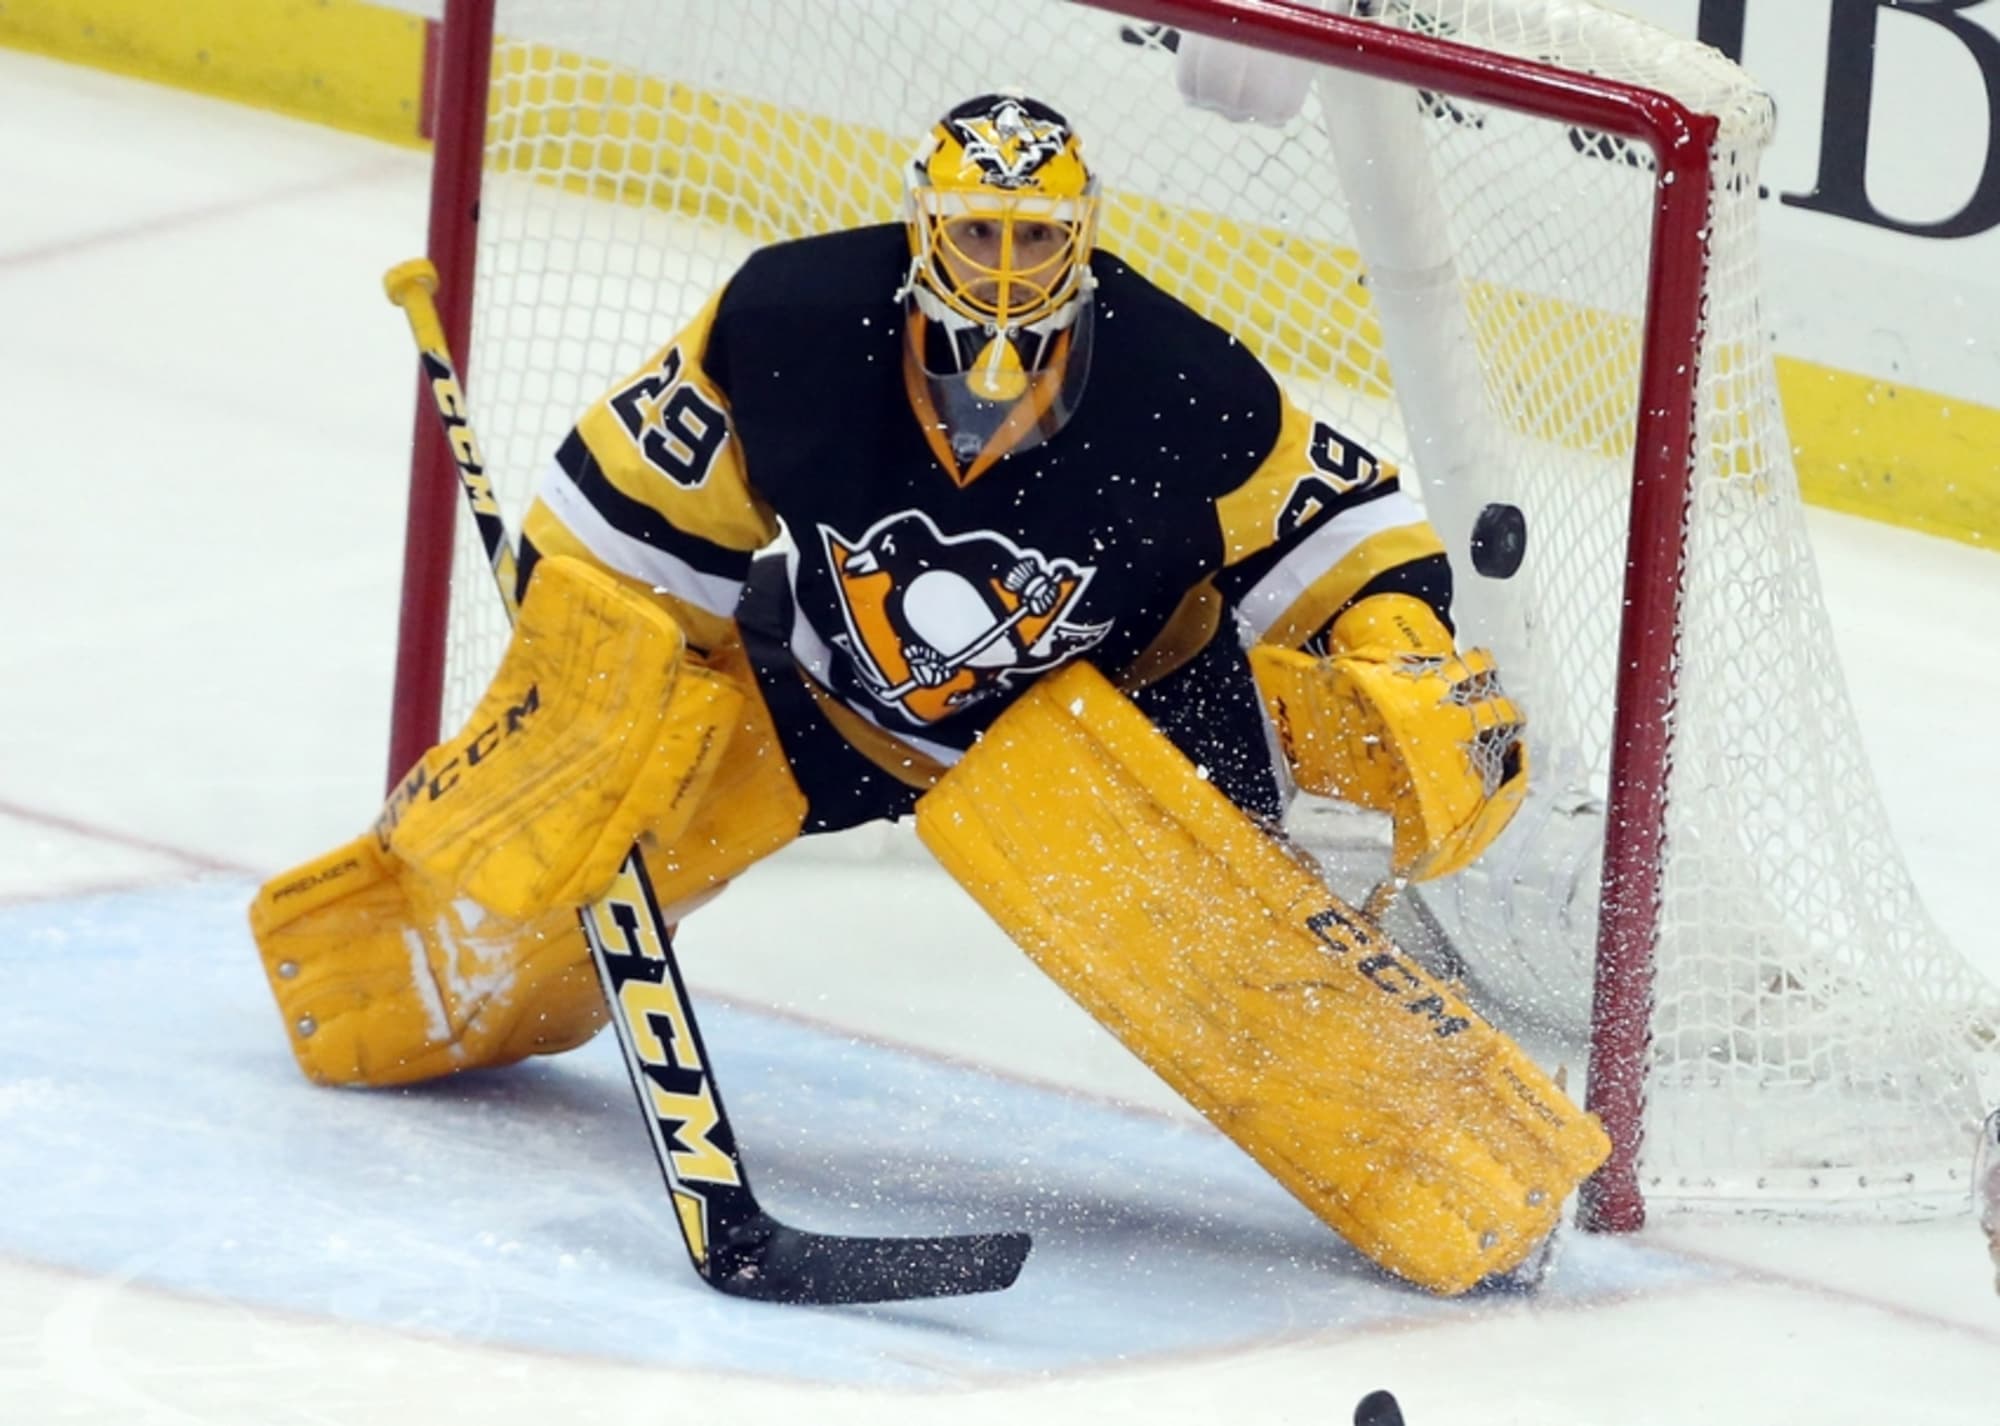 Pittsburgh Penguins goalie Marc-Andre Fleury makes a save against